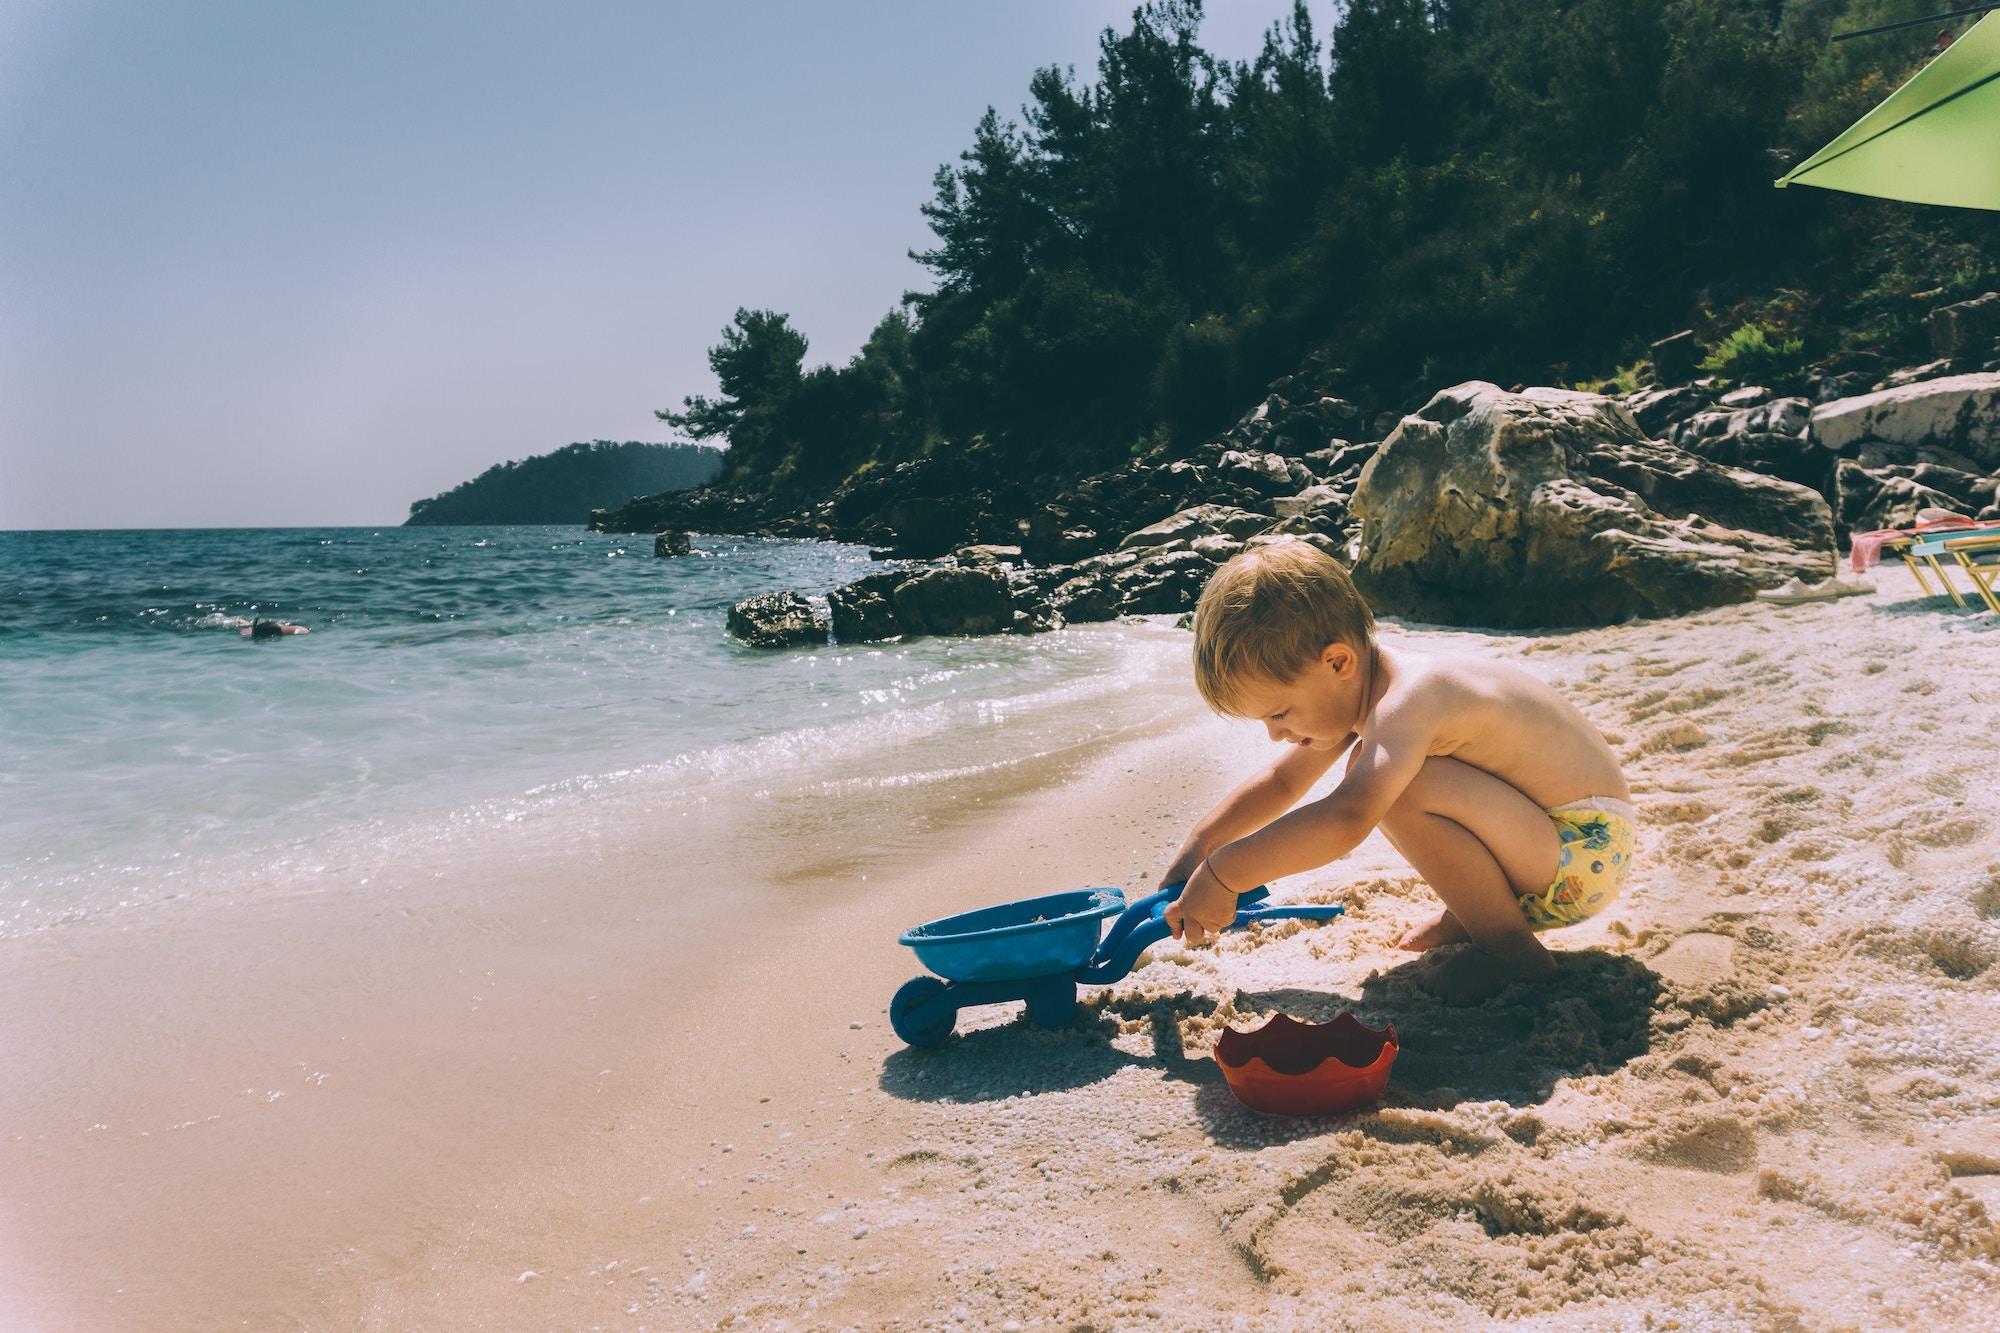 A caucasian young child on the beachside playing with sandcastle building tools.